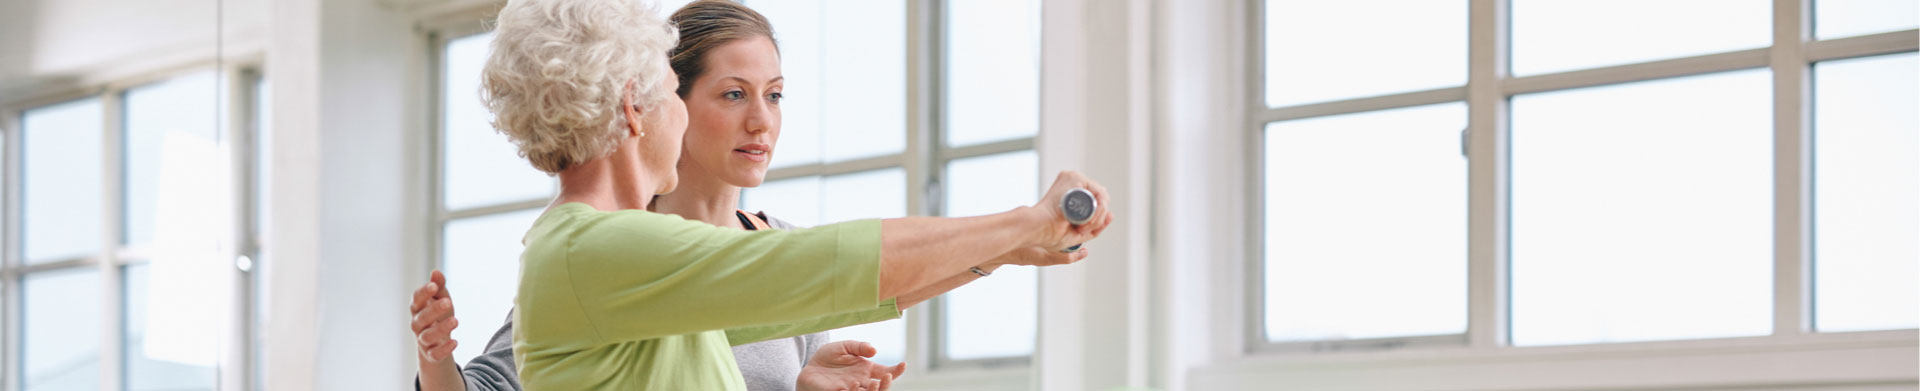 A physical therapist helps a senior woman exercise with weights